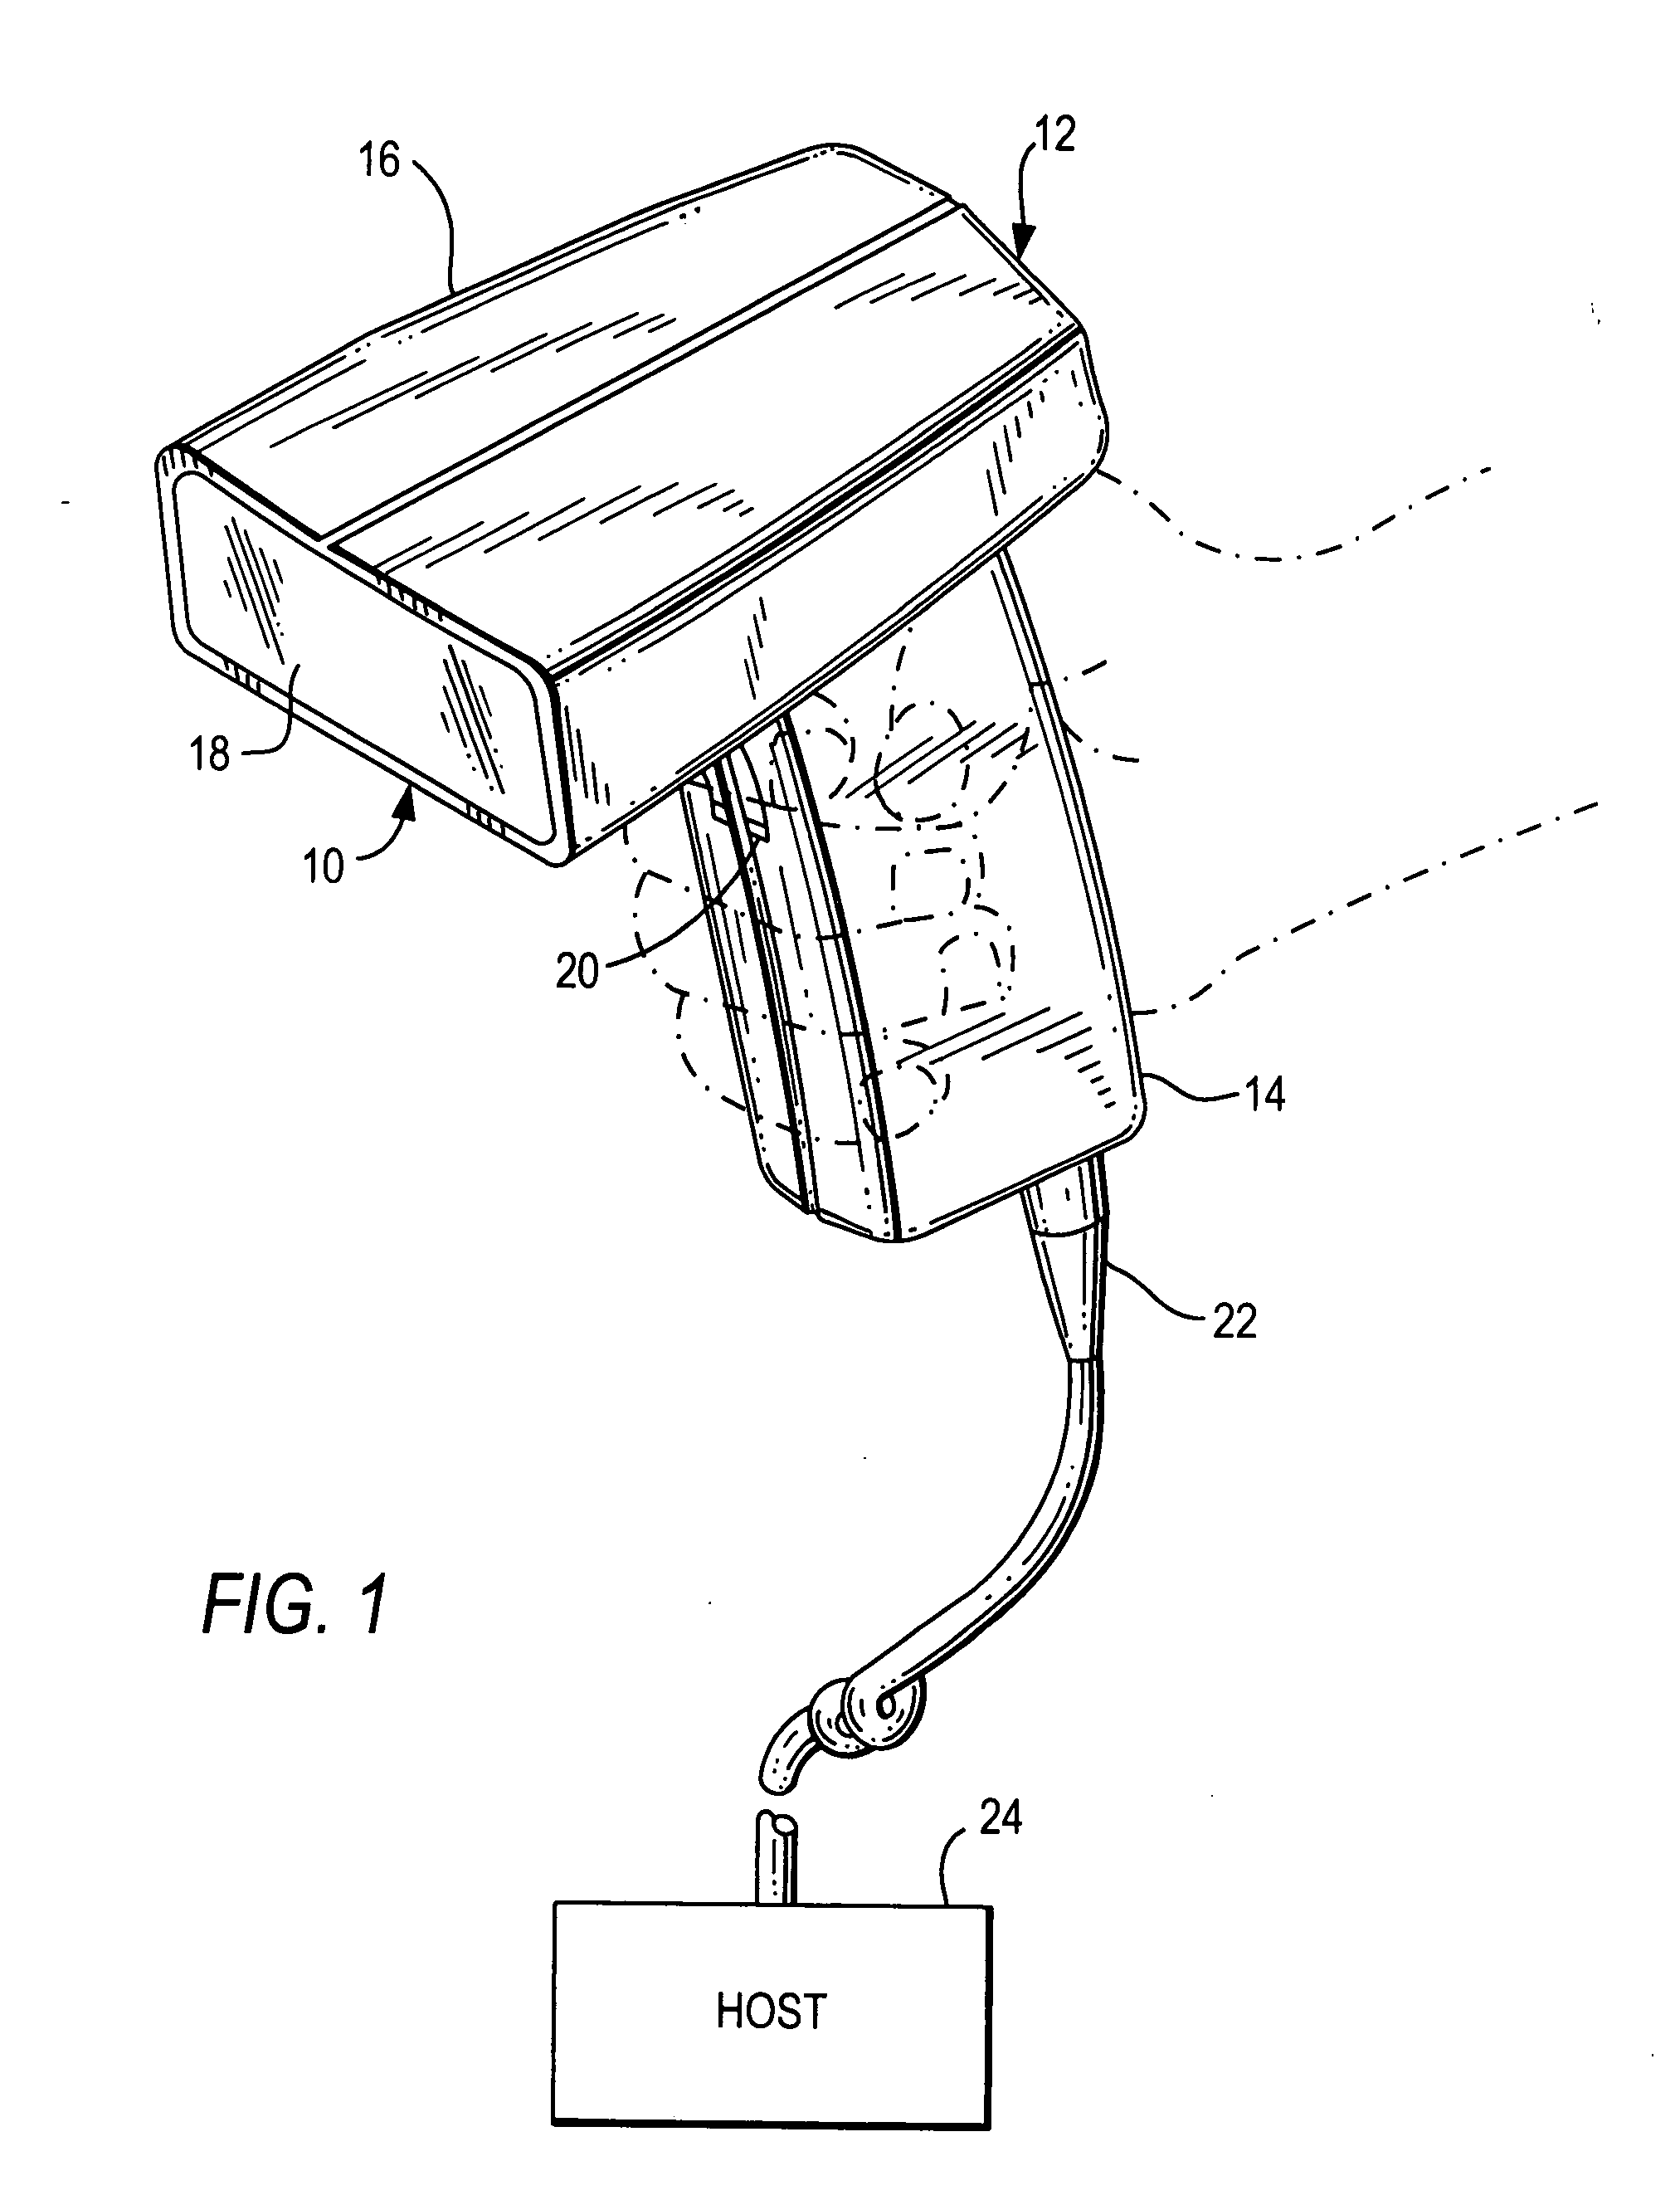 Imaging reader for and method of improving visibility of aiming pattern